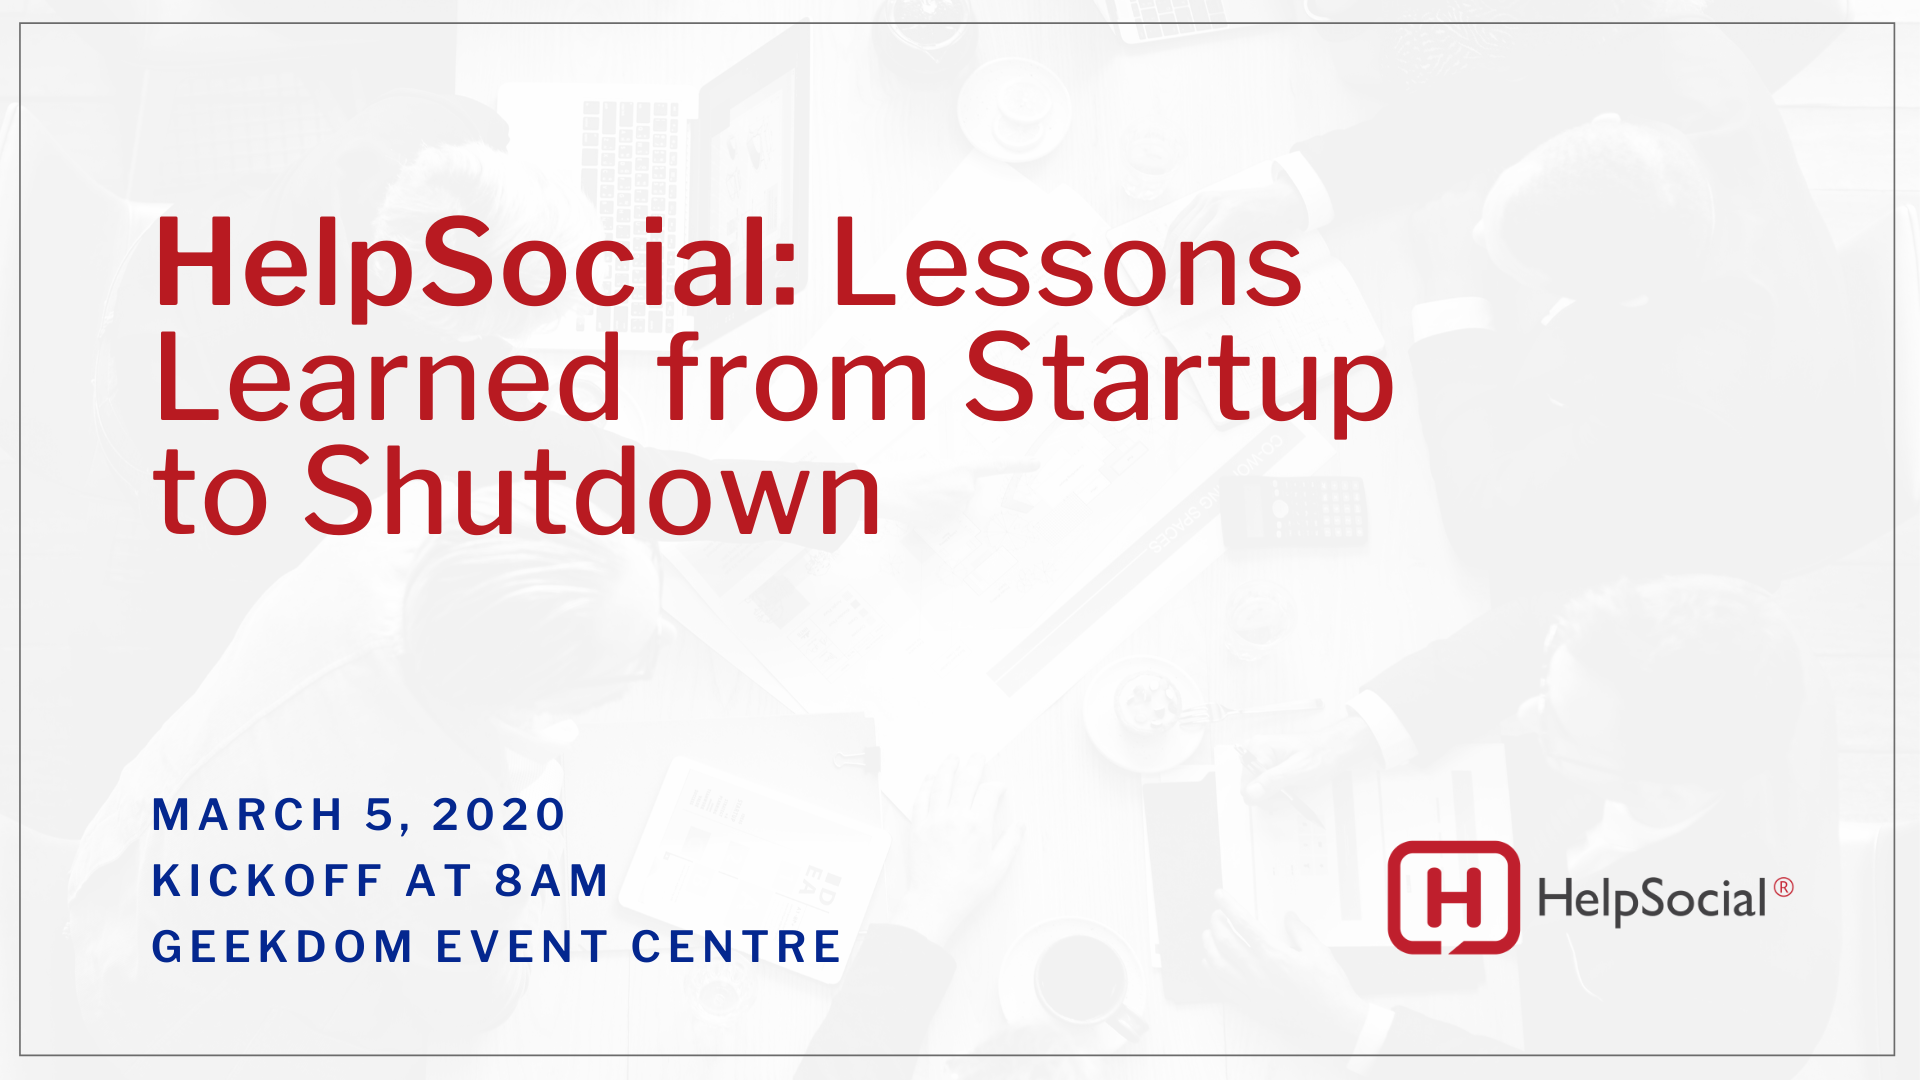 HelpSocial: Lessons Learned From Startup to Shutdown